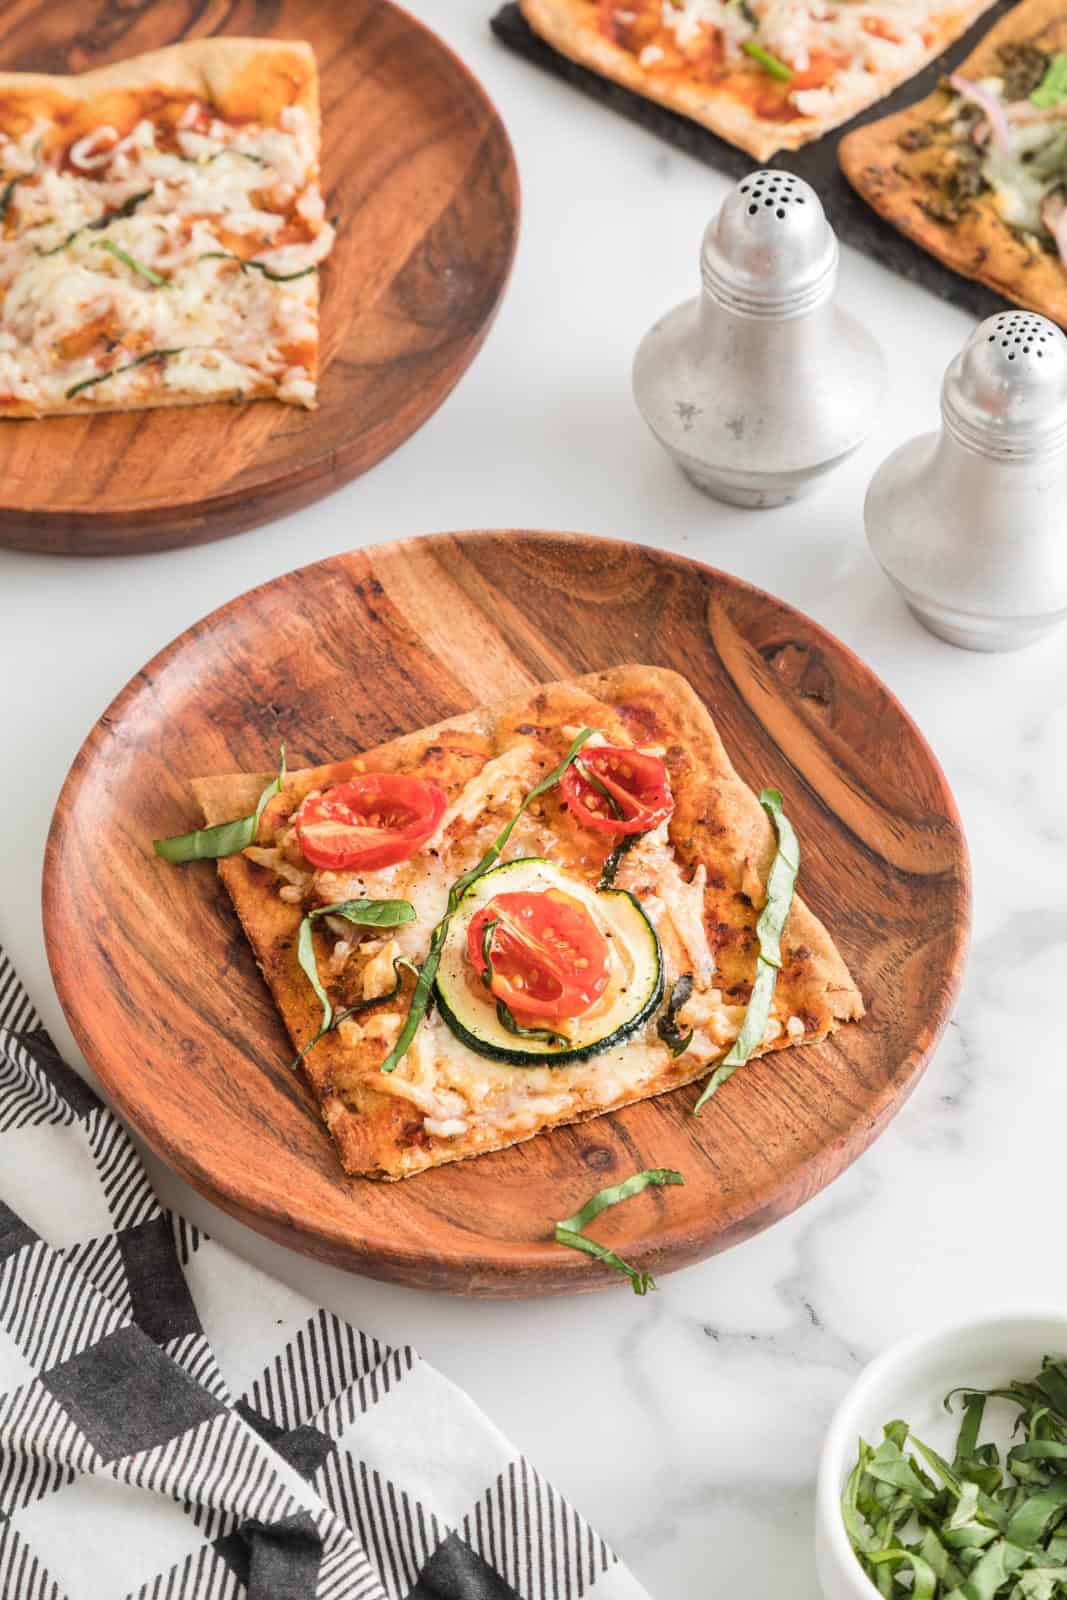 Slice of lavash pizza with zucchini, cherry tomato, and basil toppings served on wood plate.